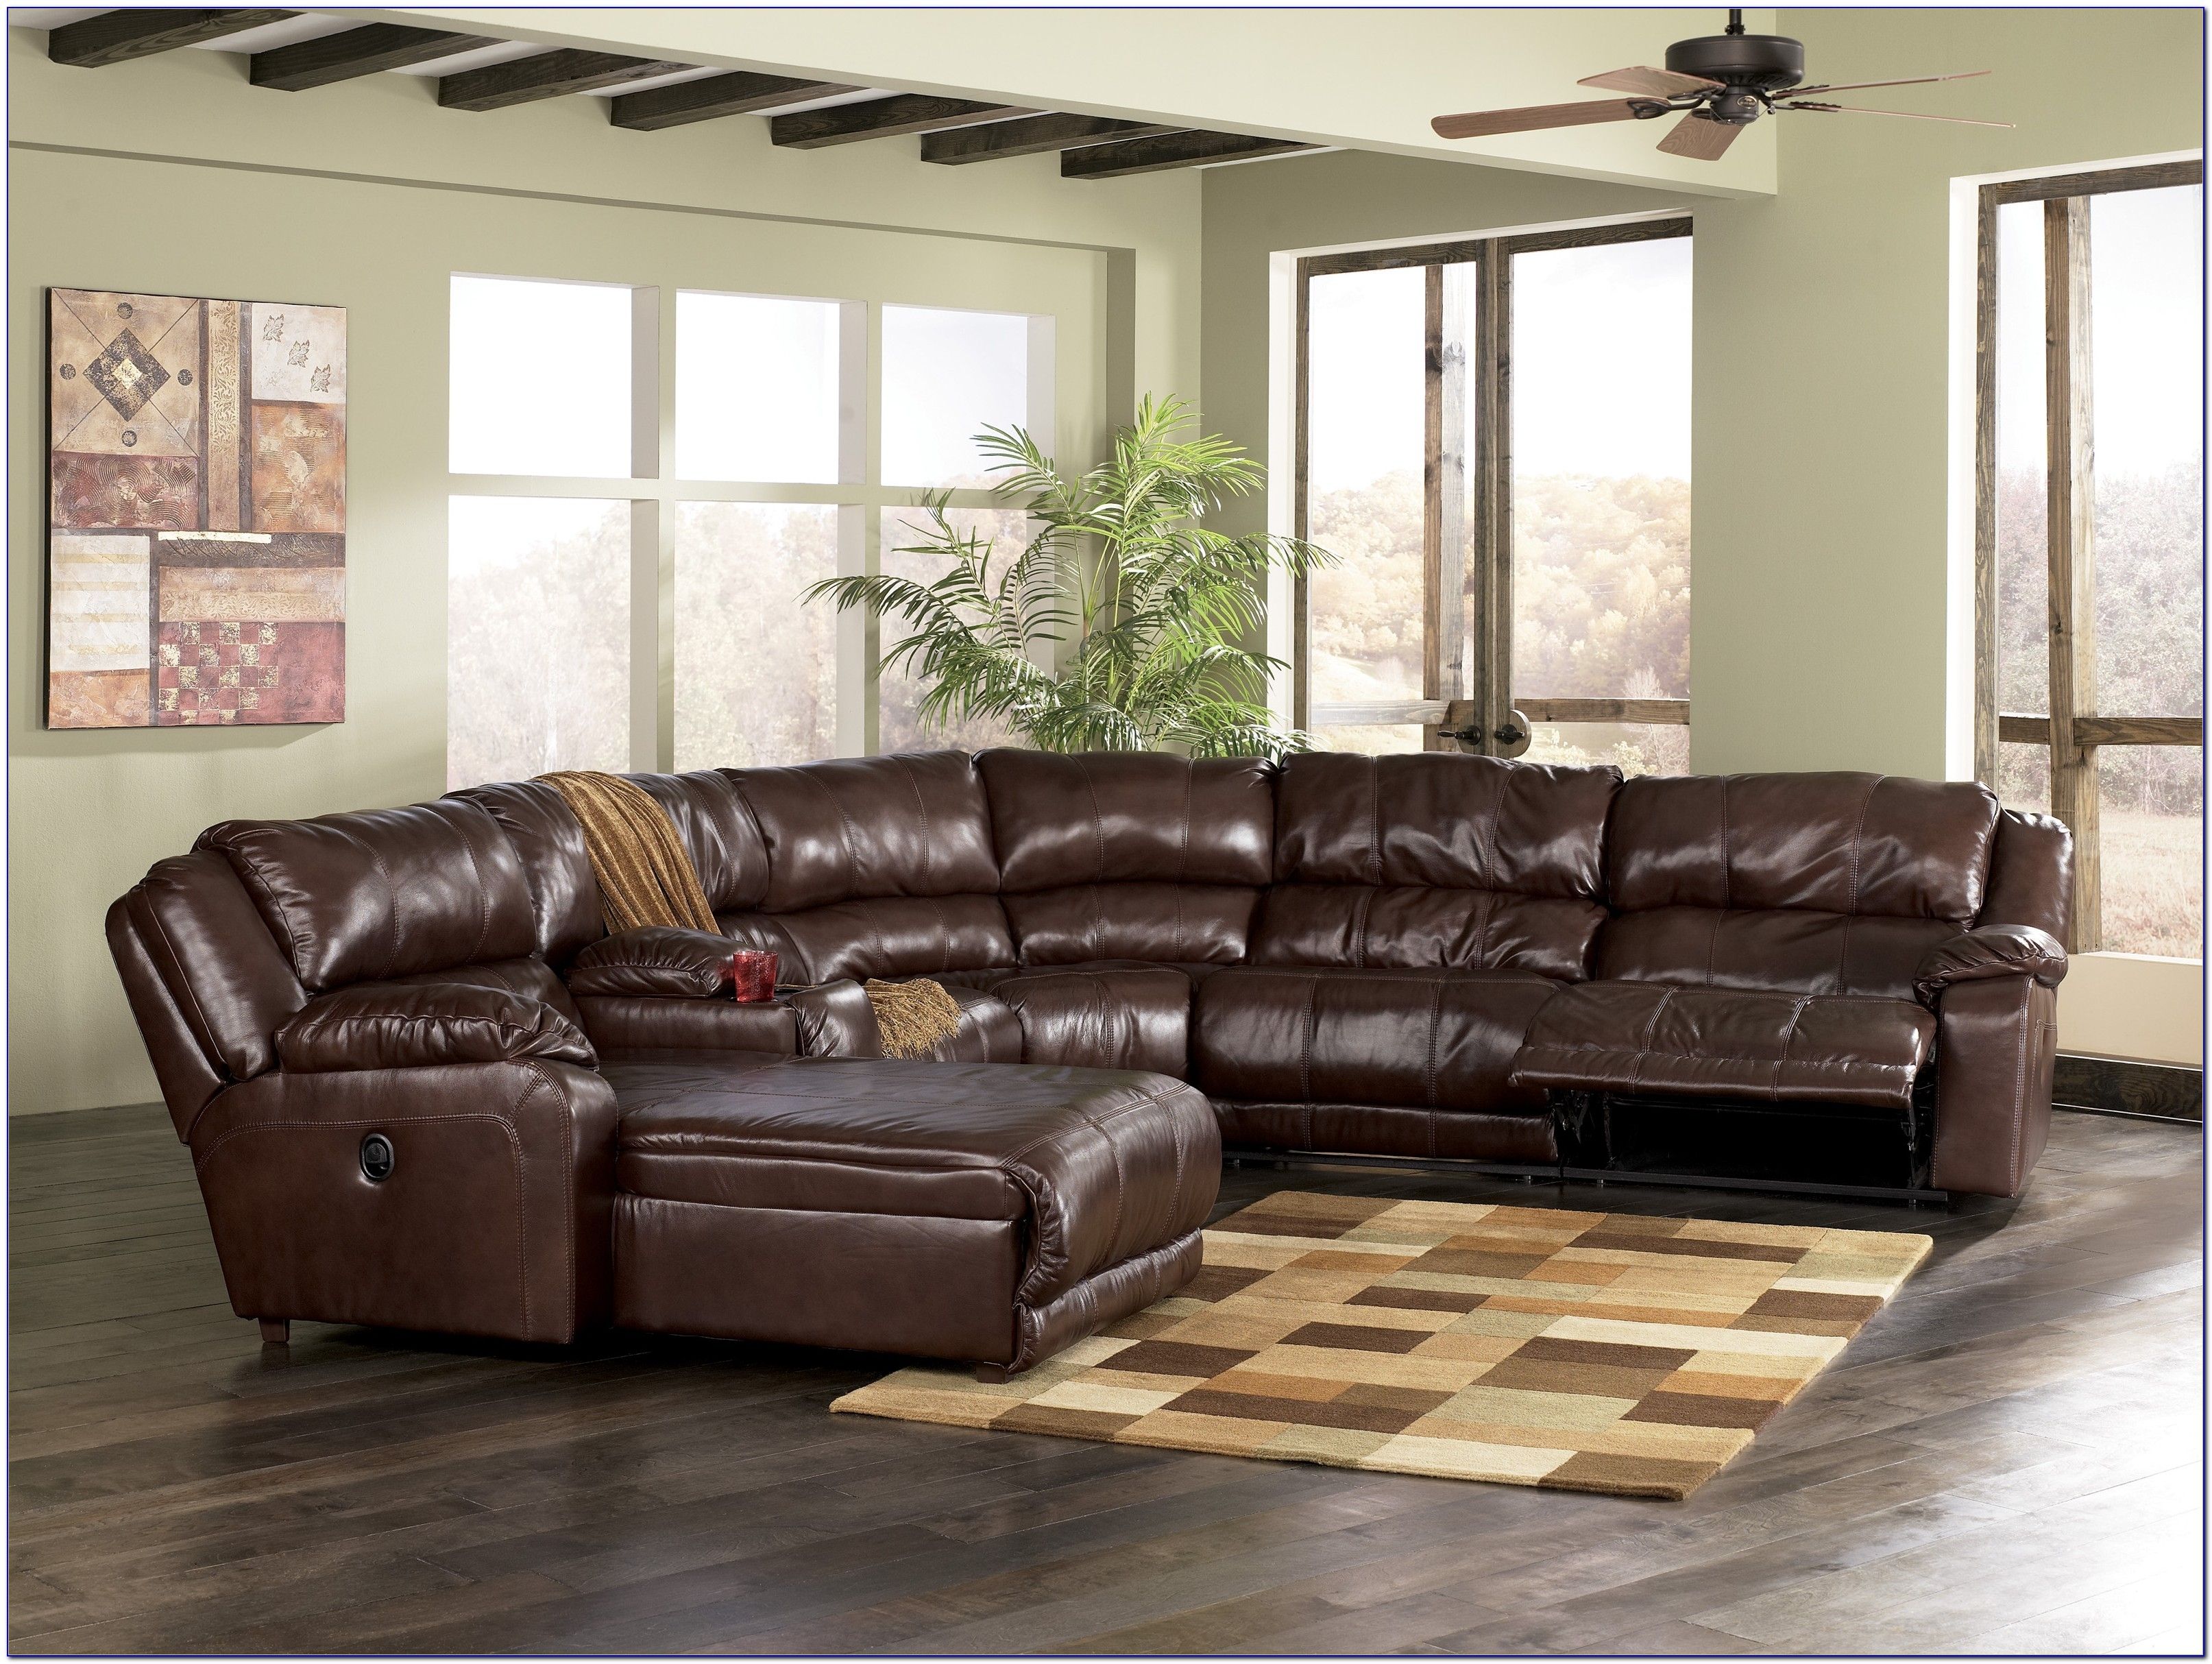 Inspirational High Back Sectional Sofas 67 About Remodel Queen Inside Sectional Sofas With High Backs (View 8 of 10)